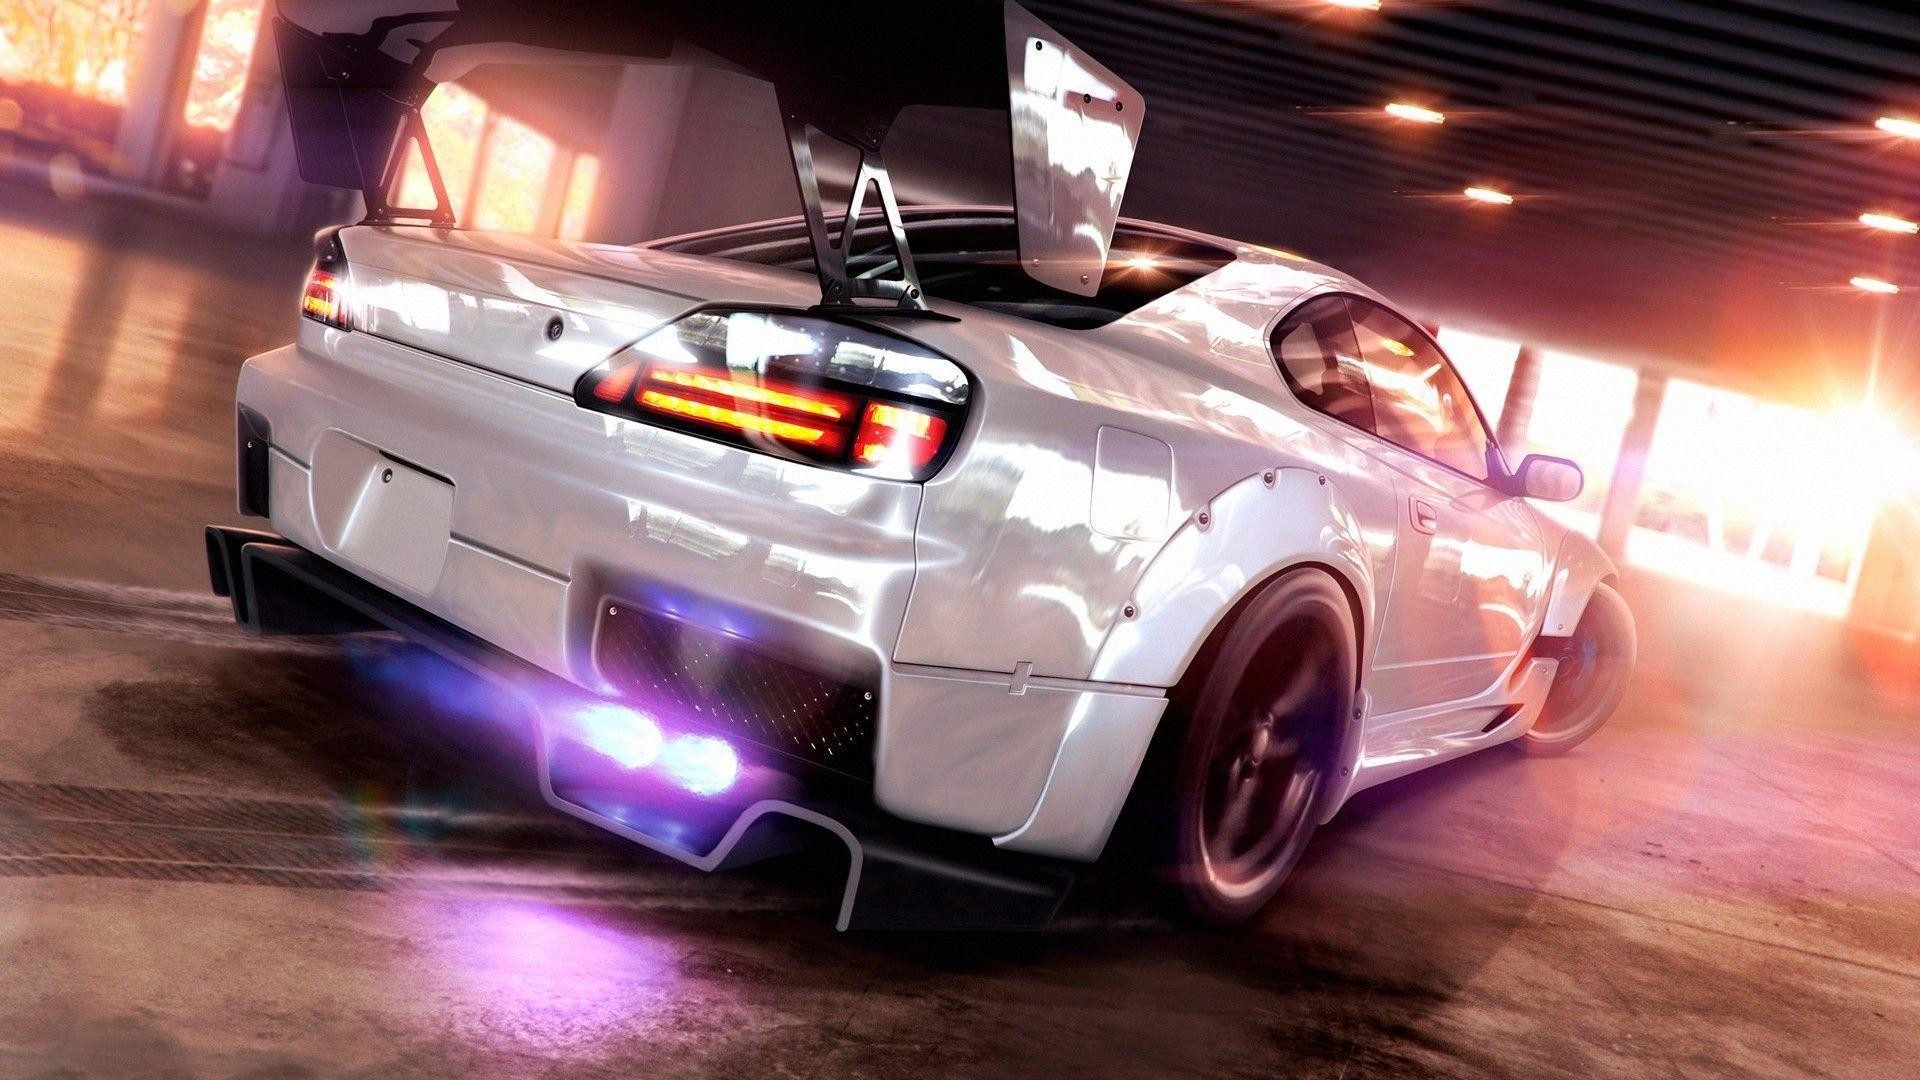 1920x1080 Need For Speed Wallpapers - HD Wallpapers Inn